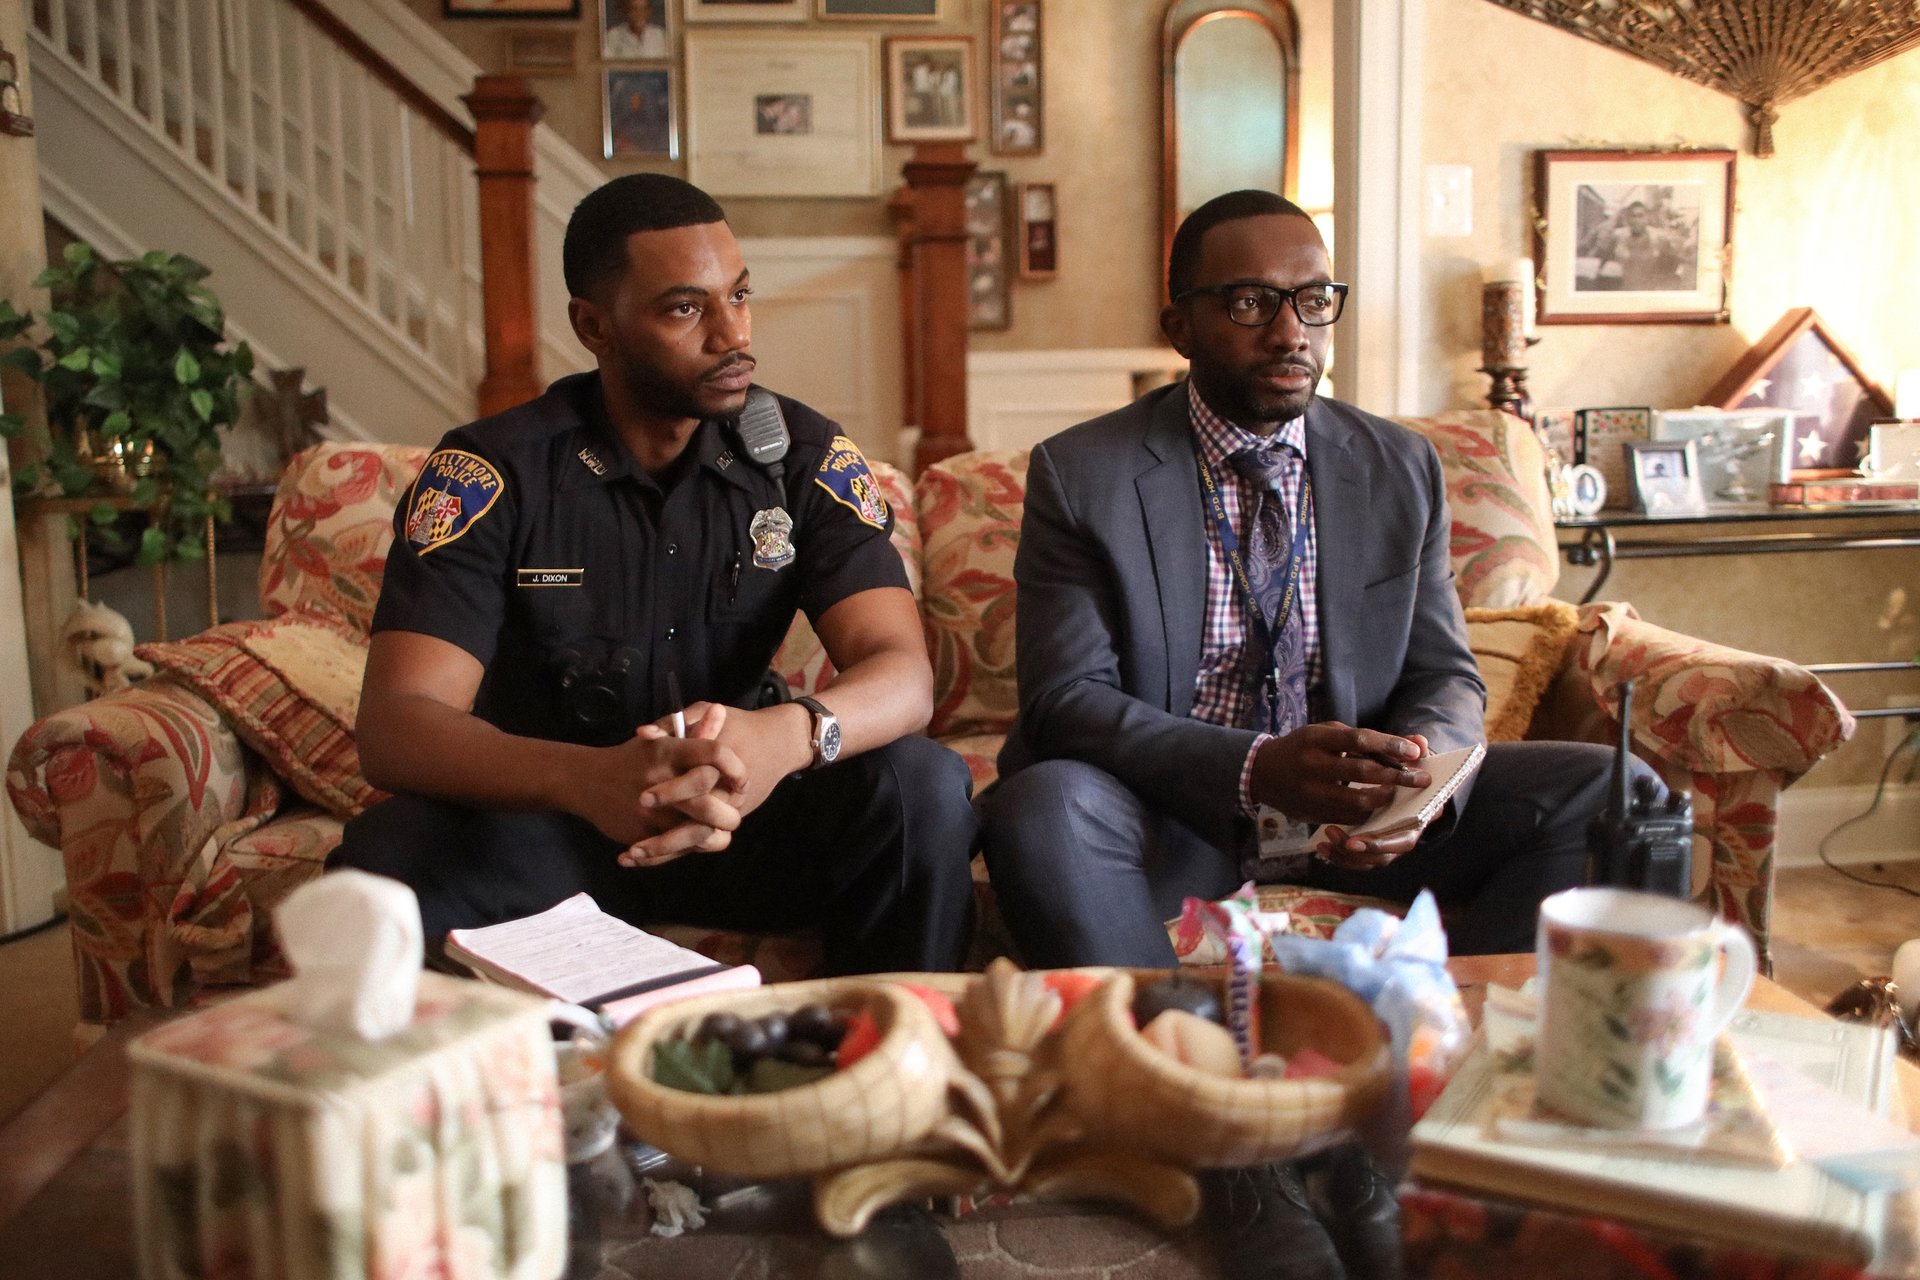 'The Wire' actor Jermaine Crawford as Jaquan Dixon wearing a cop uniform and Jamie Hector as Sean Suitor wearing a suit sitting on a couch in 'We Own This City'